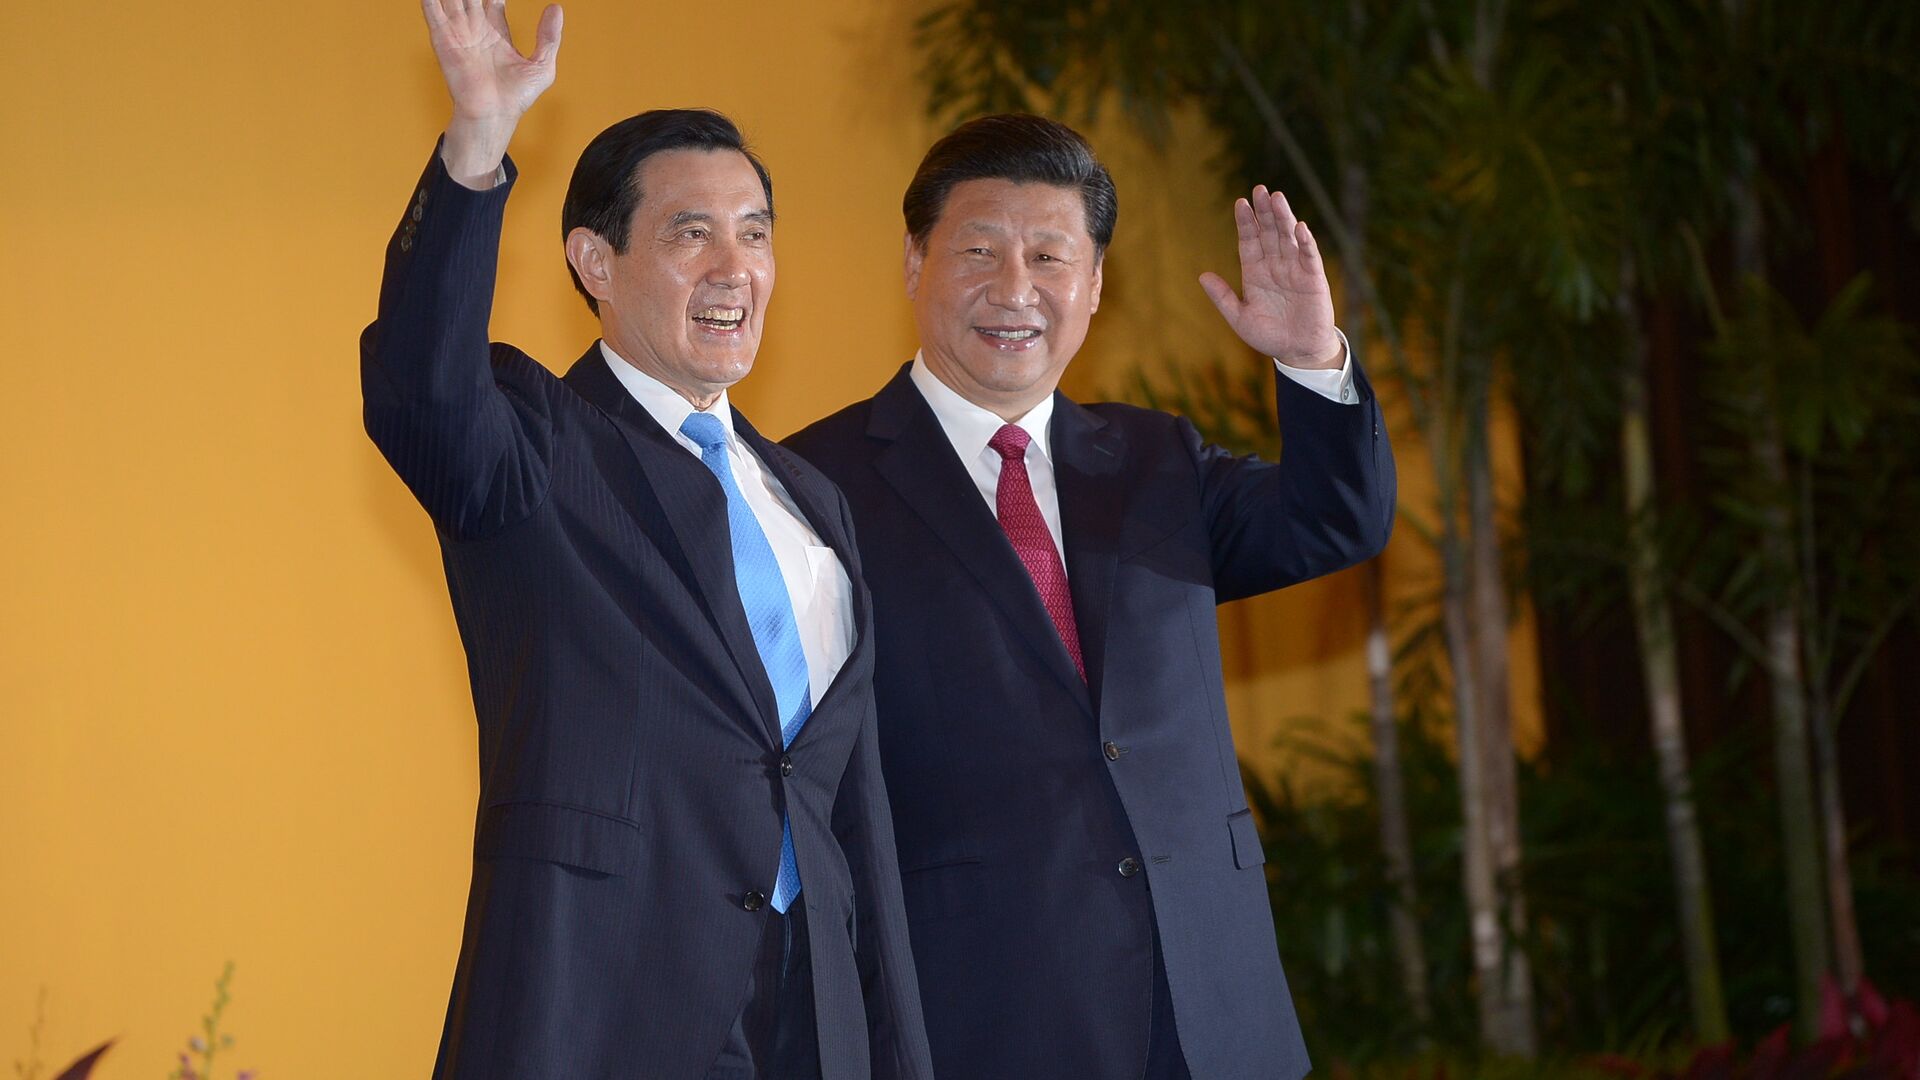 Chinese President Xi Jinping and Taiwan President Ma Ying-jeou wave to journalists before their meeting at Shangrila hotel in Singapore on November 7, 2015 - Sputnik International, 1920, 27.03.2023